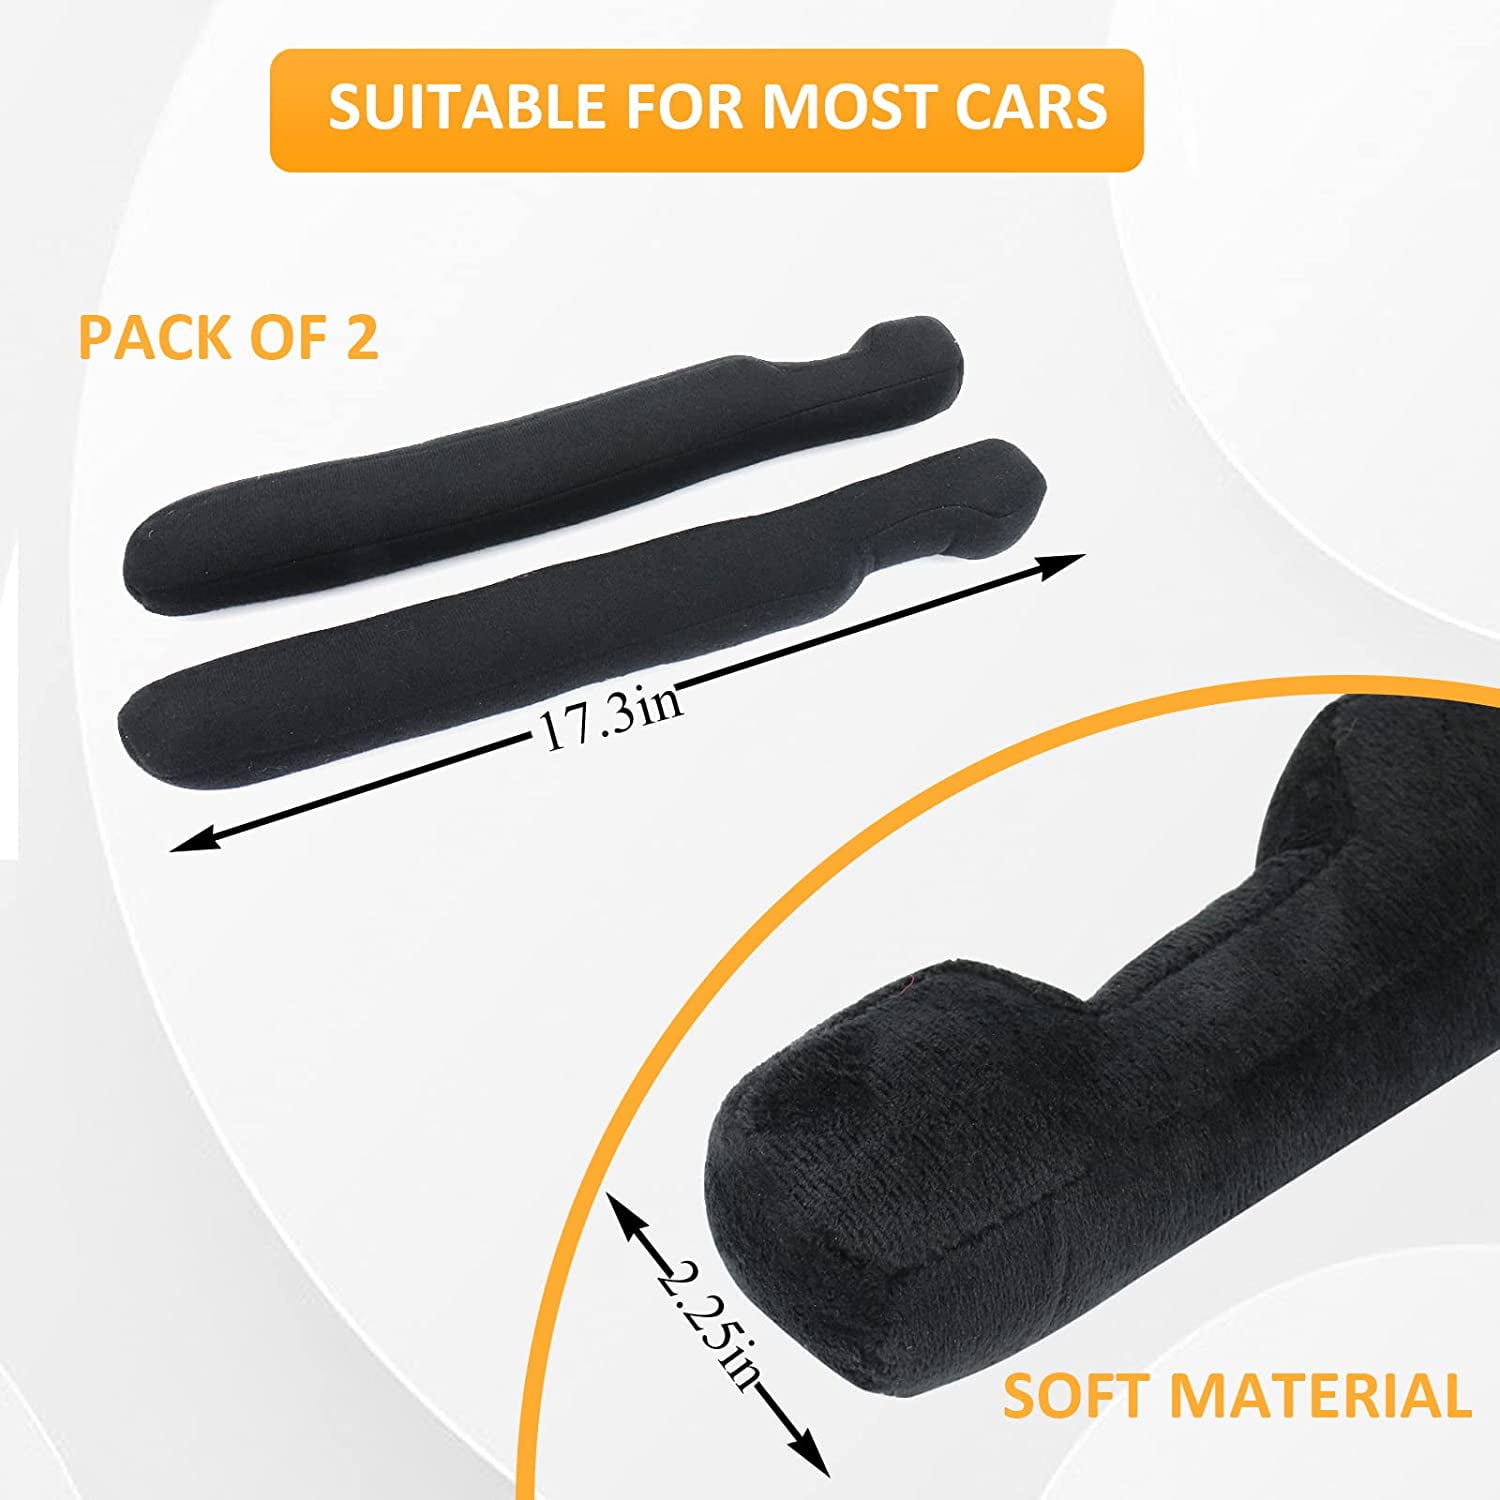 Axutous Car Seat Gap Filler Universal for Car SUV Truck Fit Organizer  Accessories Fill The Gap Between Seat and Console Stop Things from Dropping  Pack